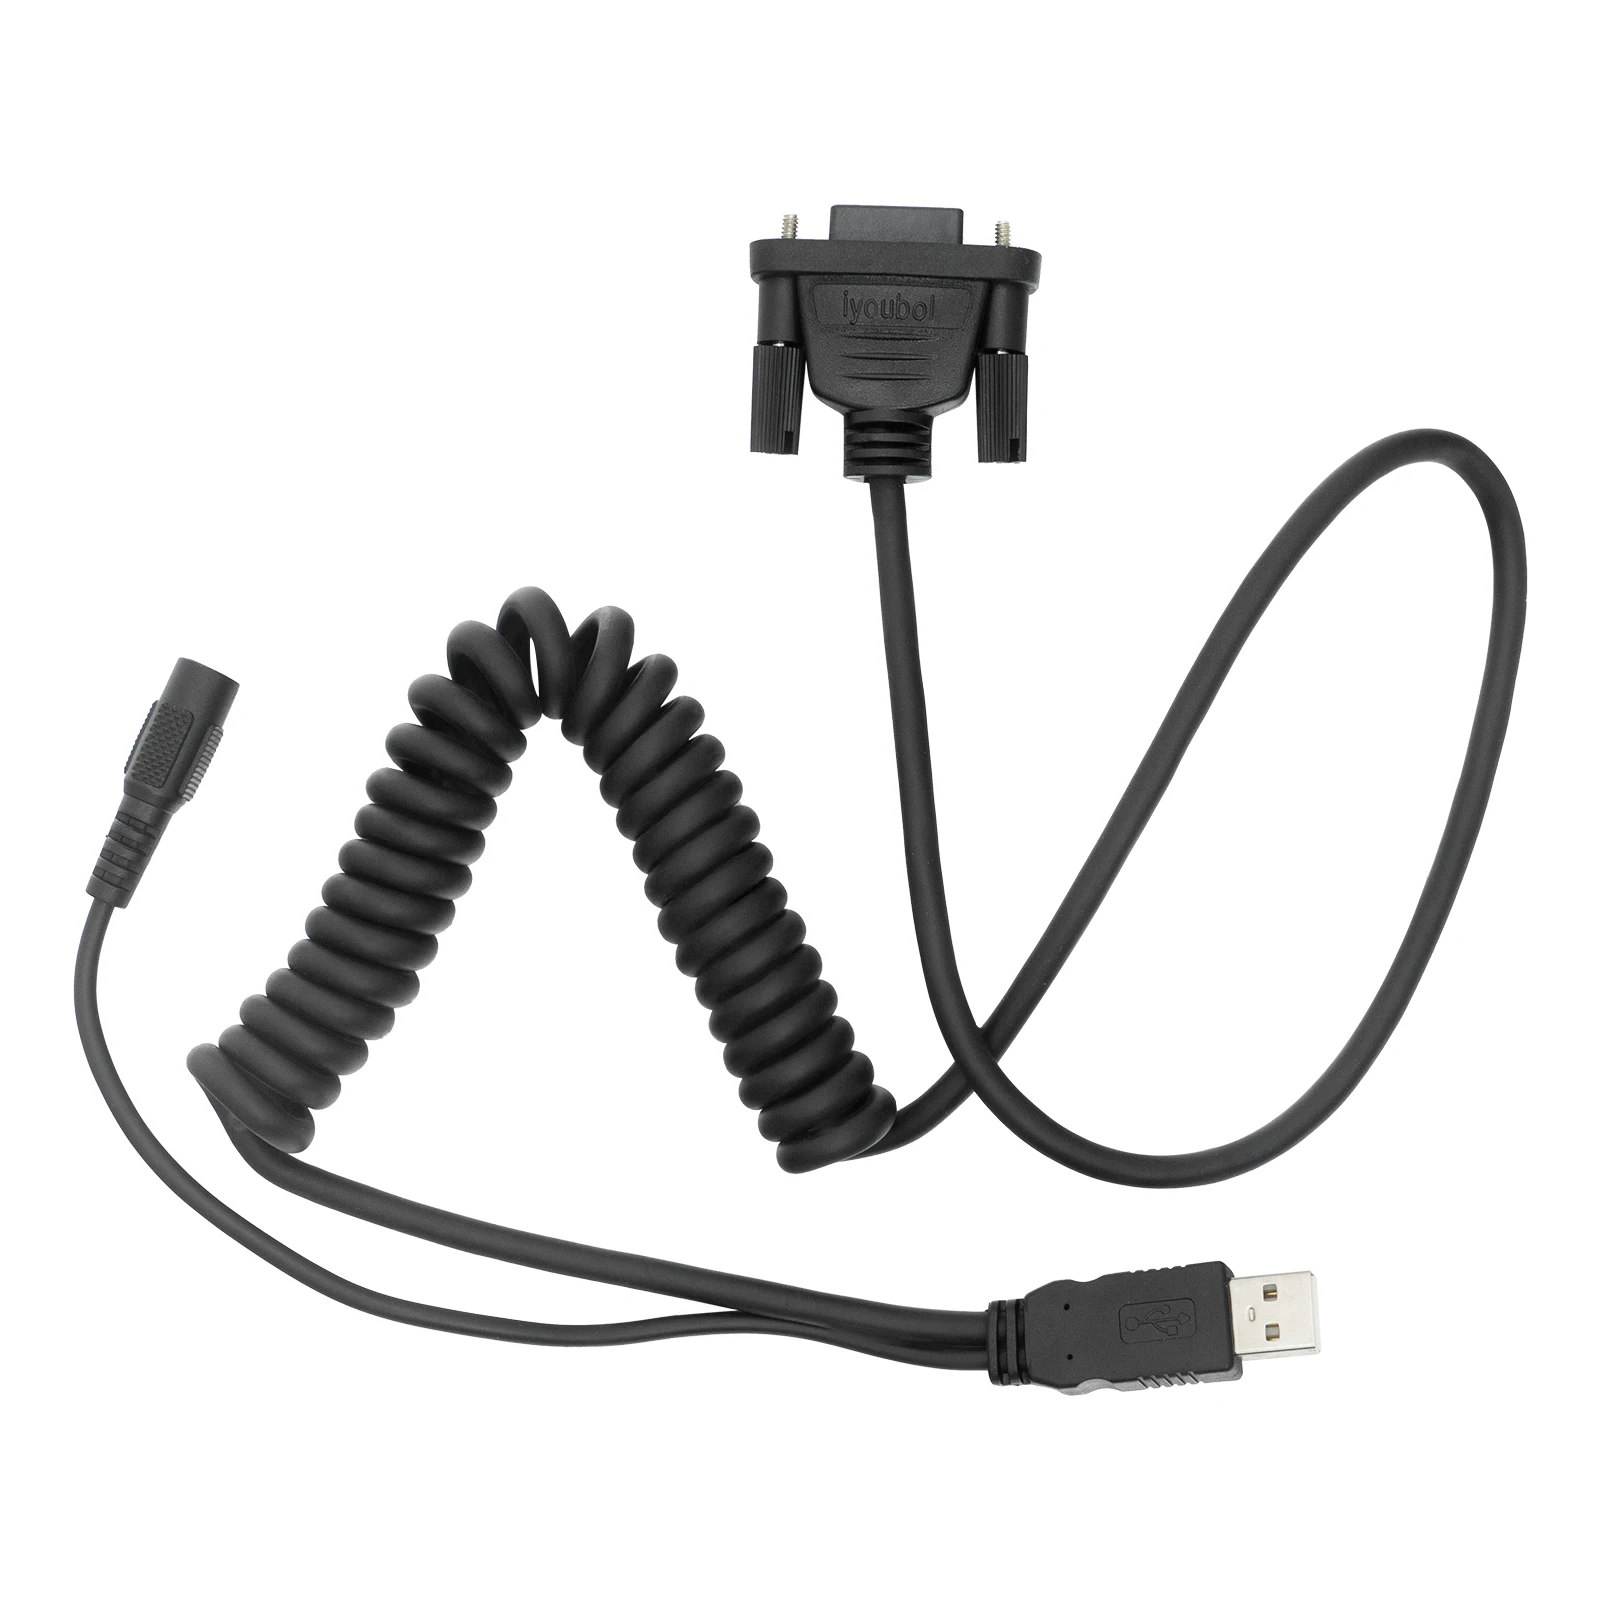 

USB DATA Cable For Honeywell Dolphin 9500 9550 9900 LXE MX6 Lots